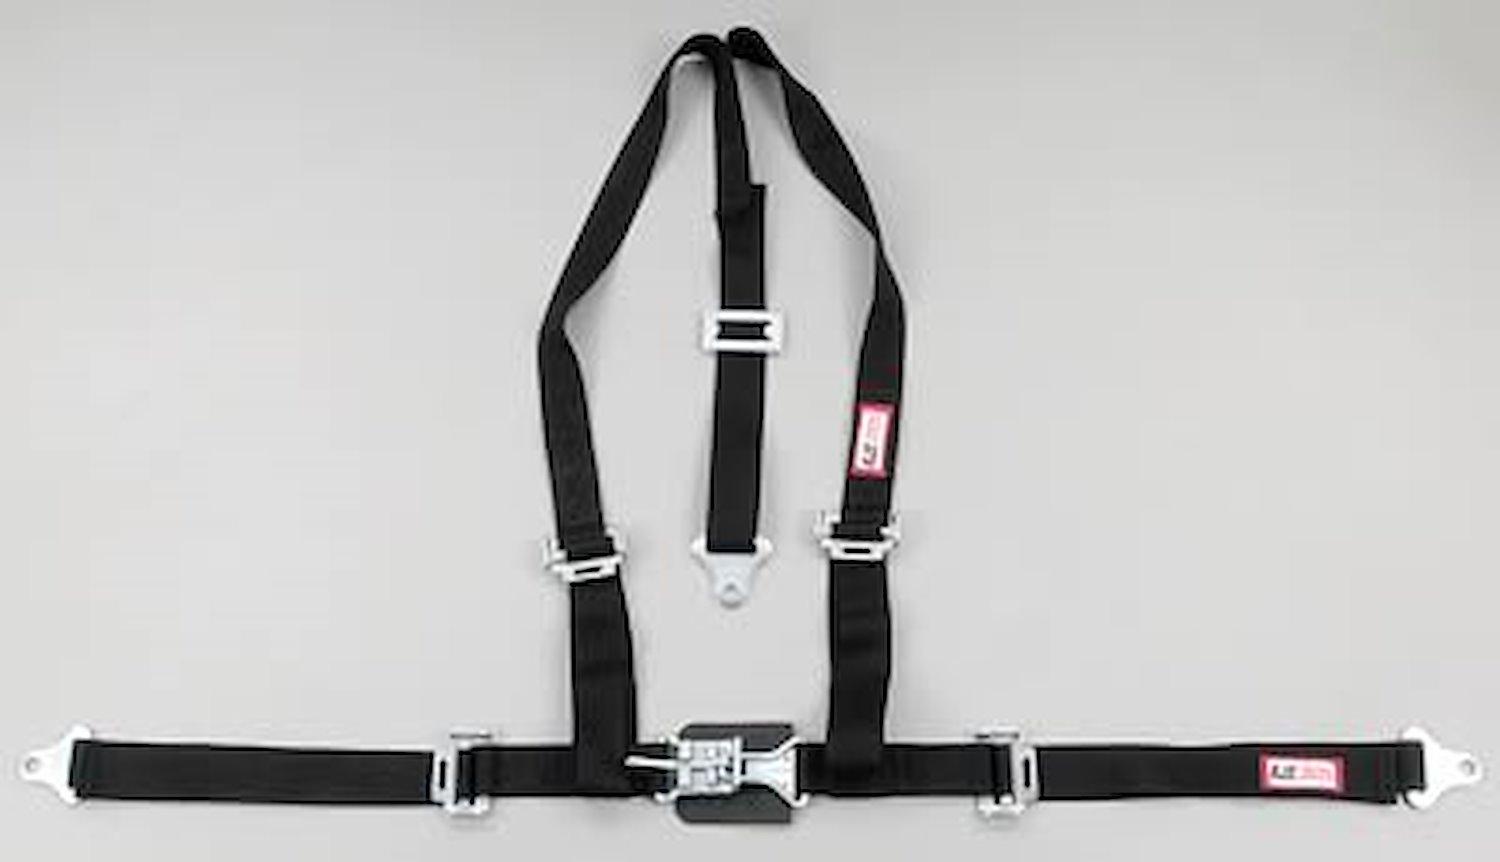 NON-SFI L&L HARNESS 3 PULL UP Lap BELT SEWN IN 2 S.H. Y FLOOR Mount w/STERNUM STRAP ALL WRAP ENDS BLUE